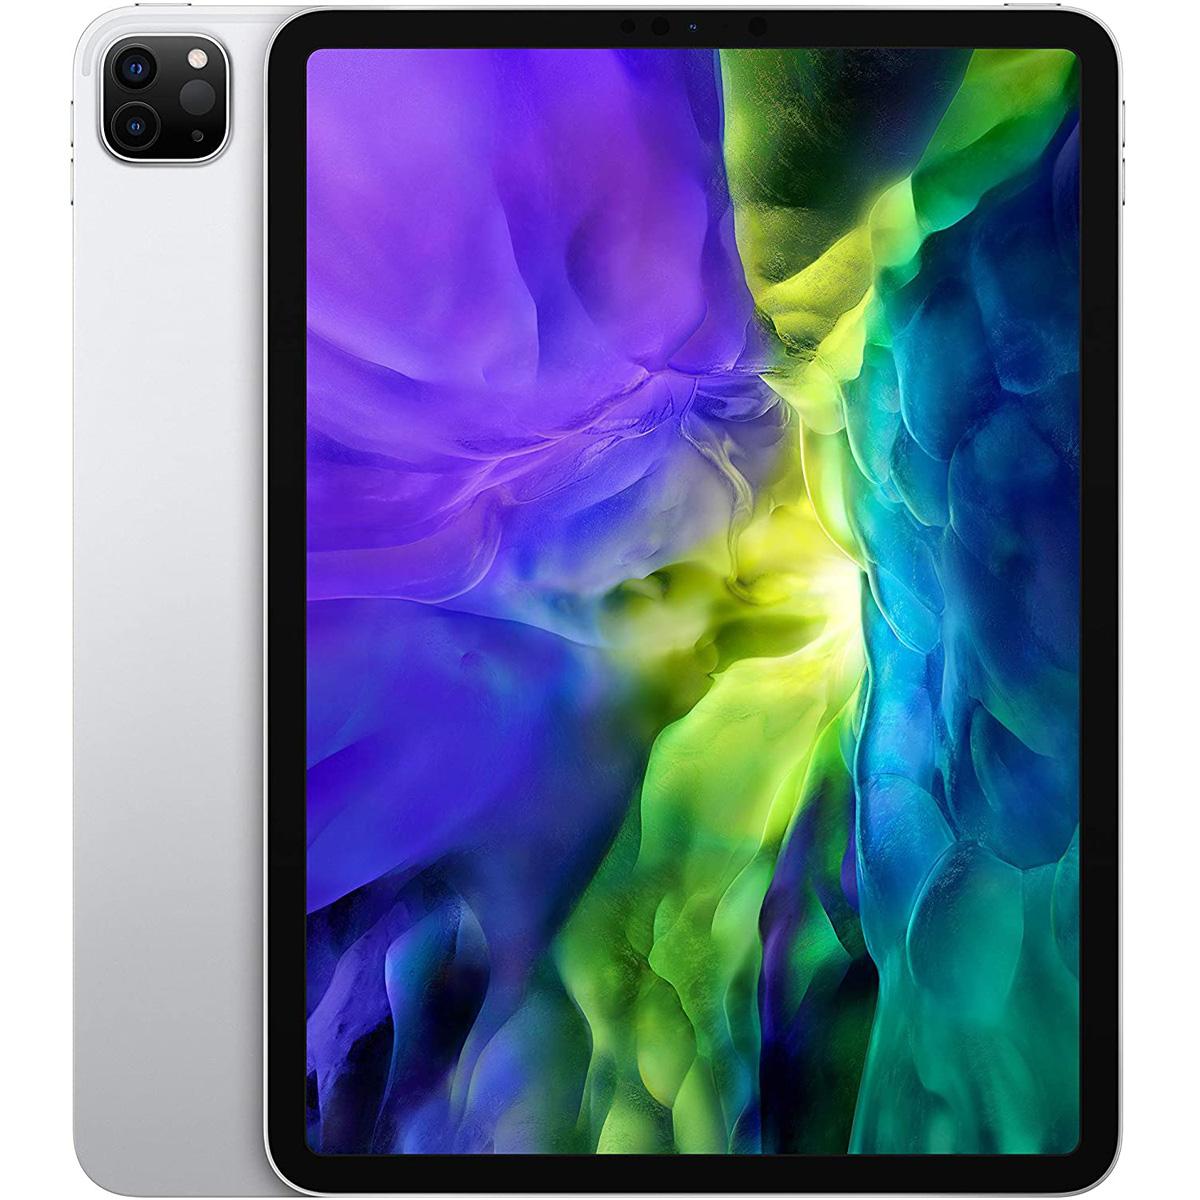 Apple iPad Pro 11in A12Z 128GB Tablet for $699.99 Shipped